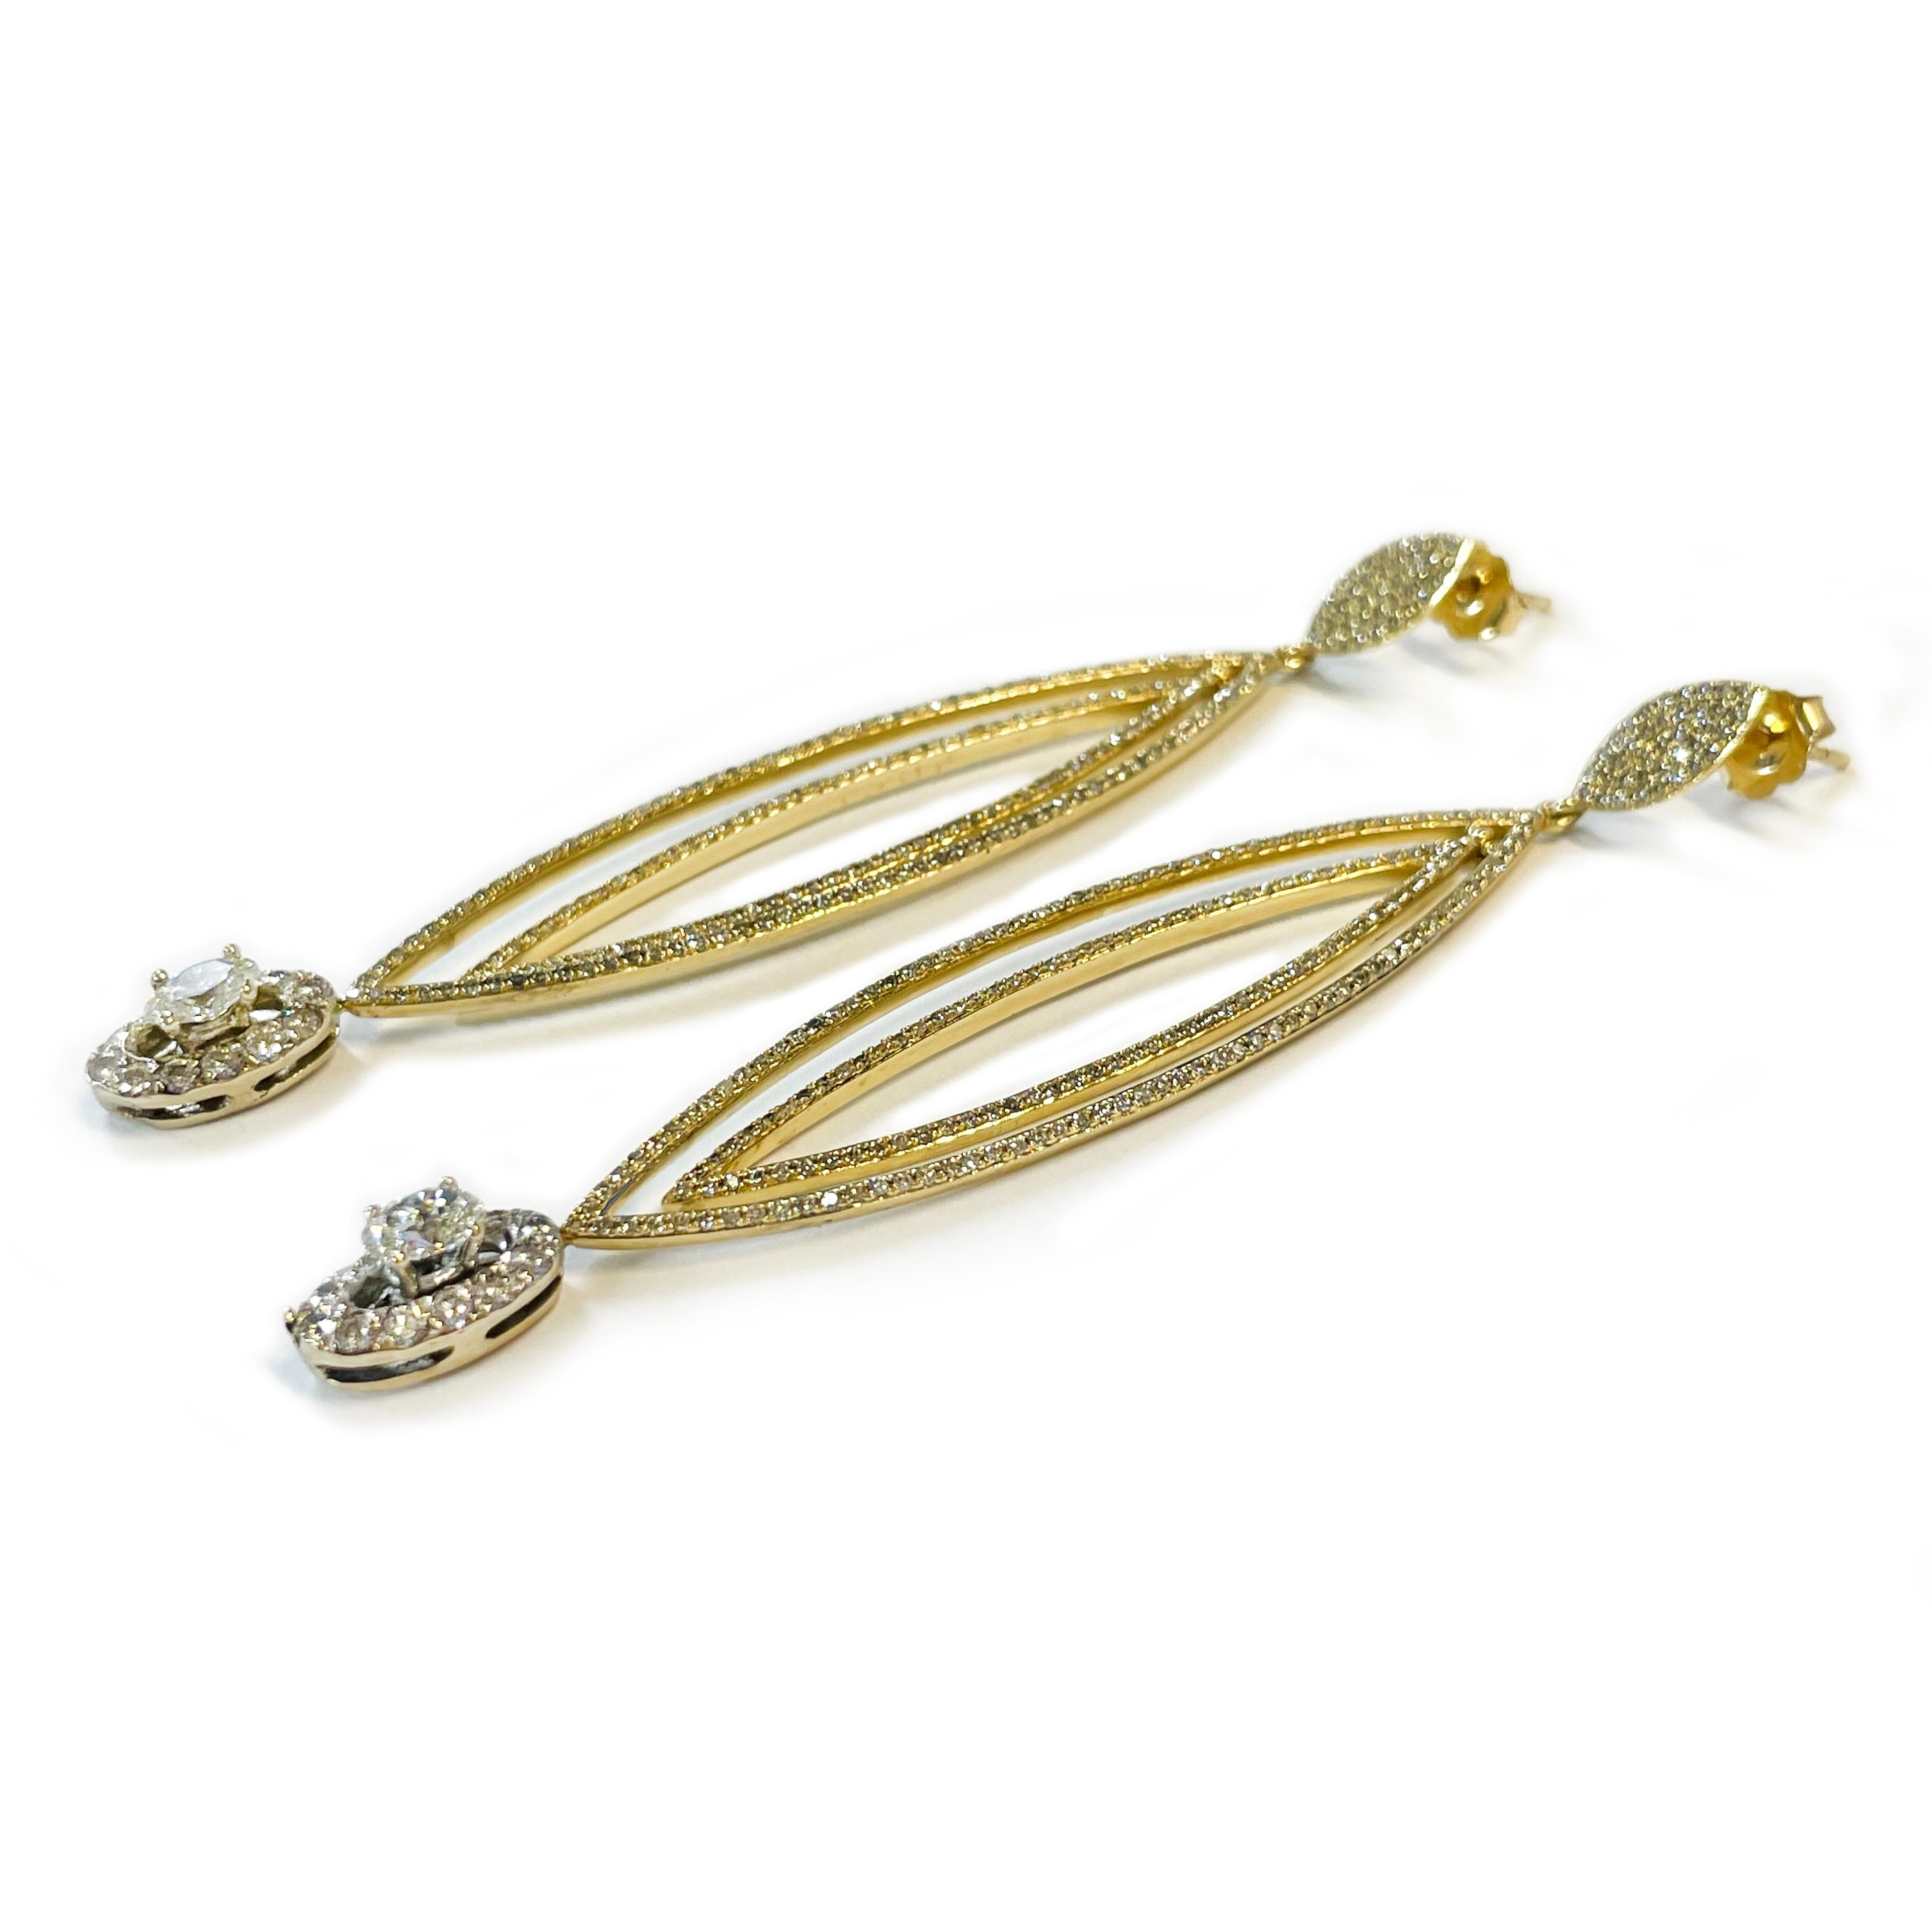 14 Karat Yellow Gold Ellipse Diamond Earrings. These extra sparkly earrings feature pave and bead-set diamonds on two elongated ellipse-shaped pointy hoops and a larger oval diamond with round diamond halo at the bottom. The larger two primary oval